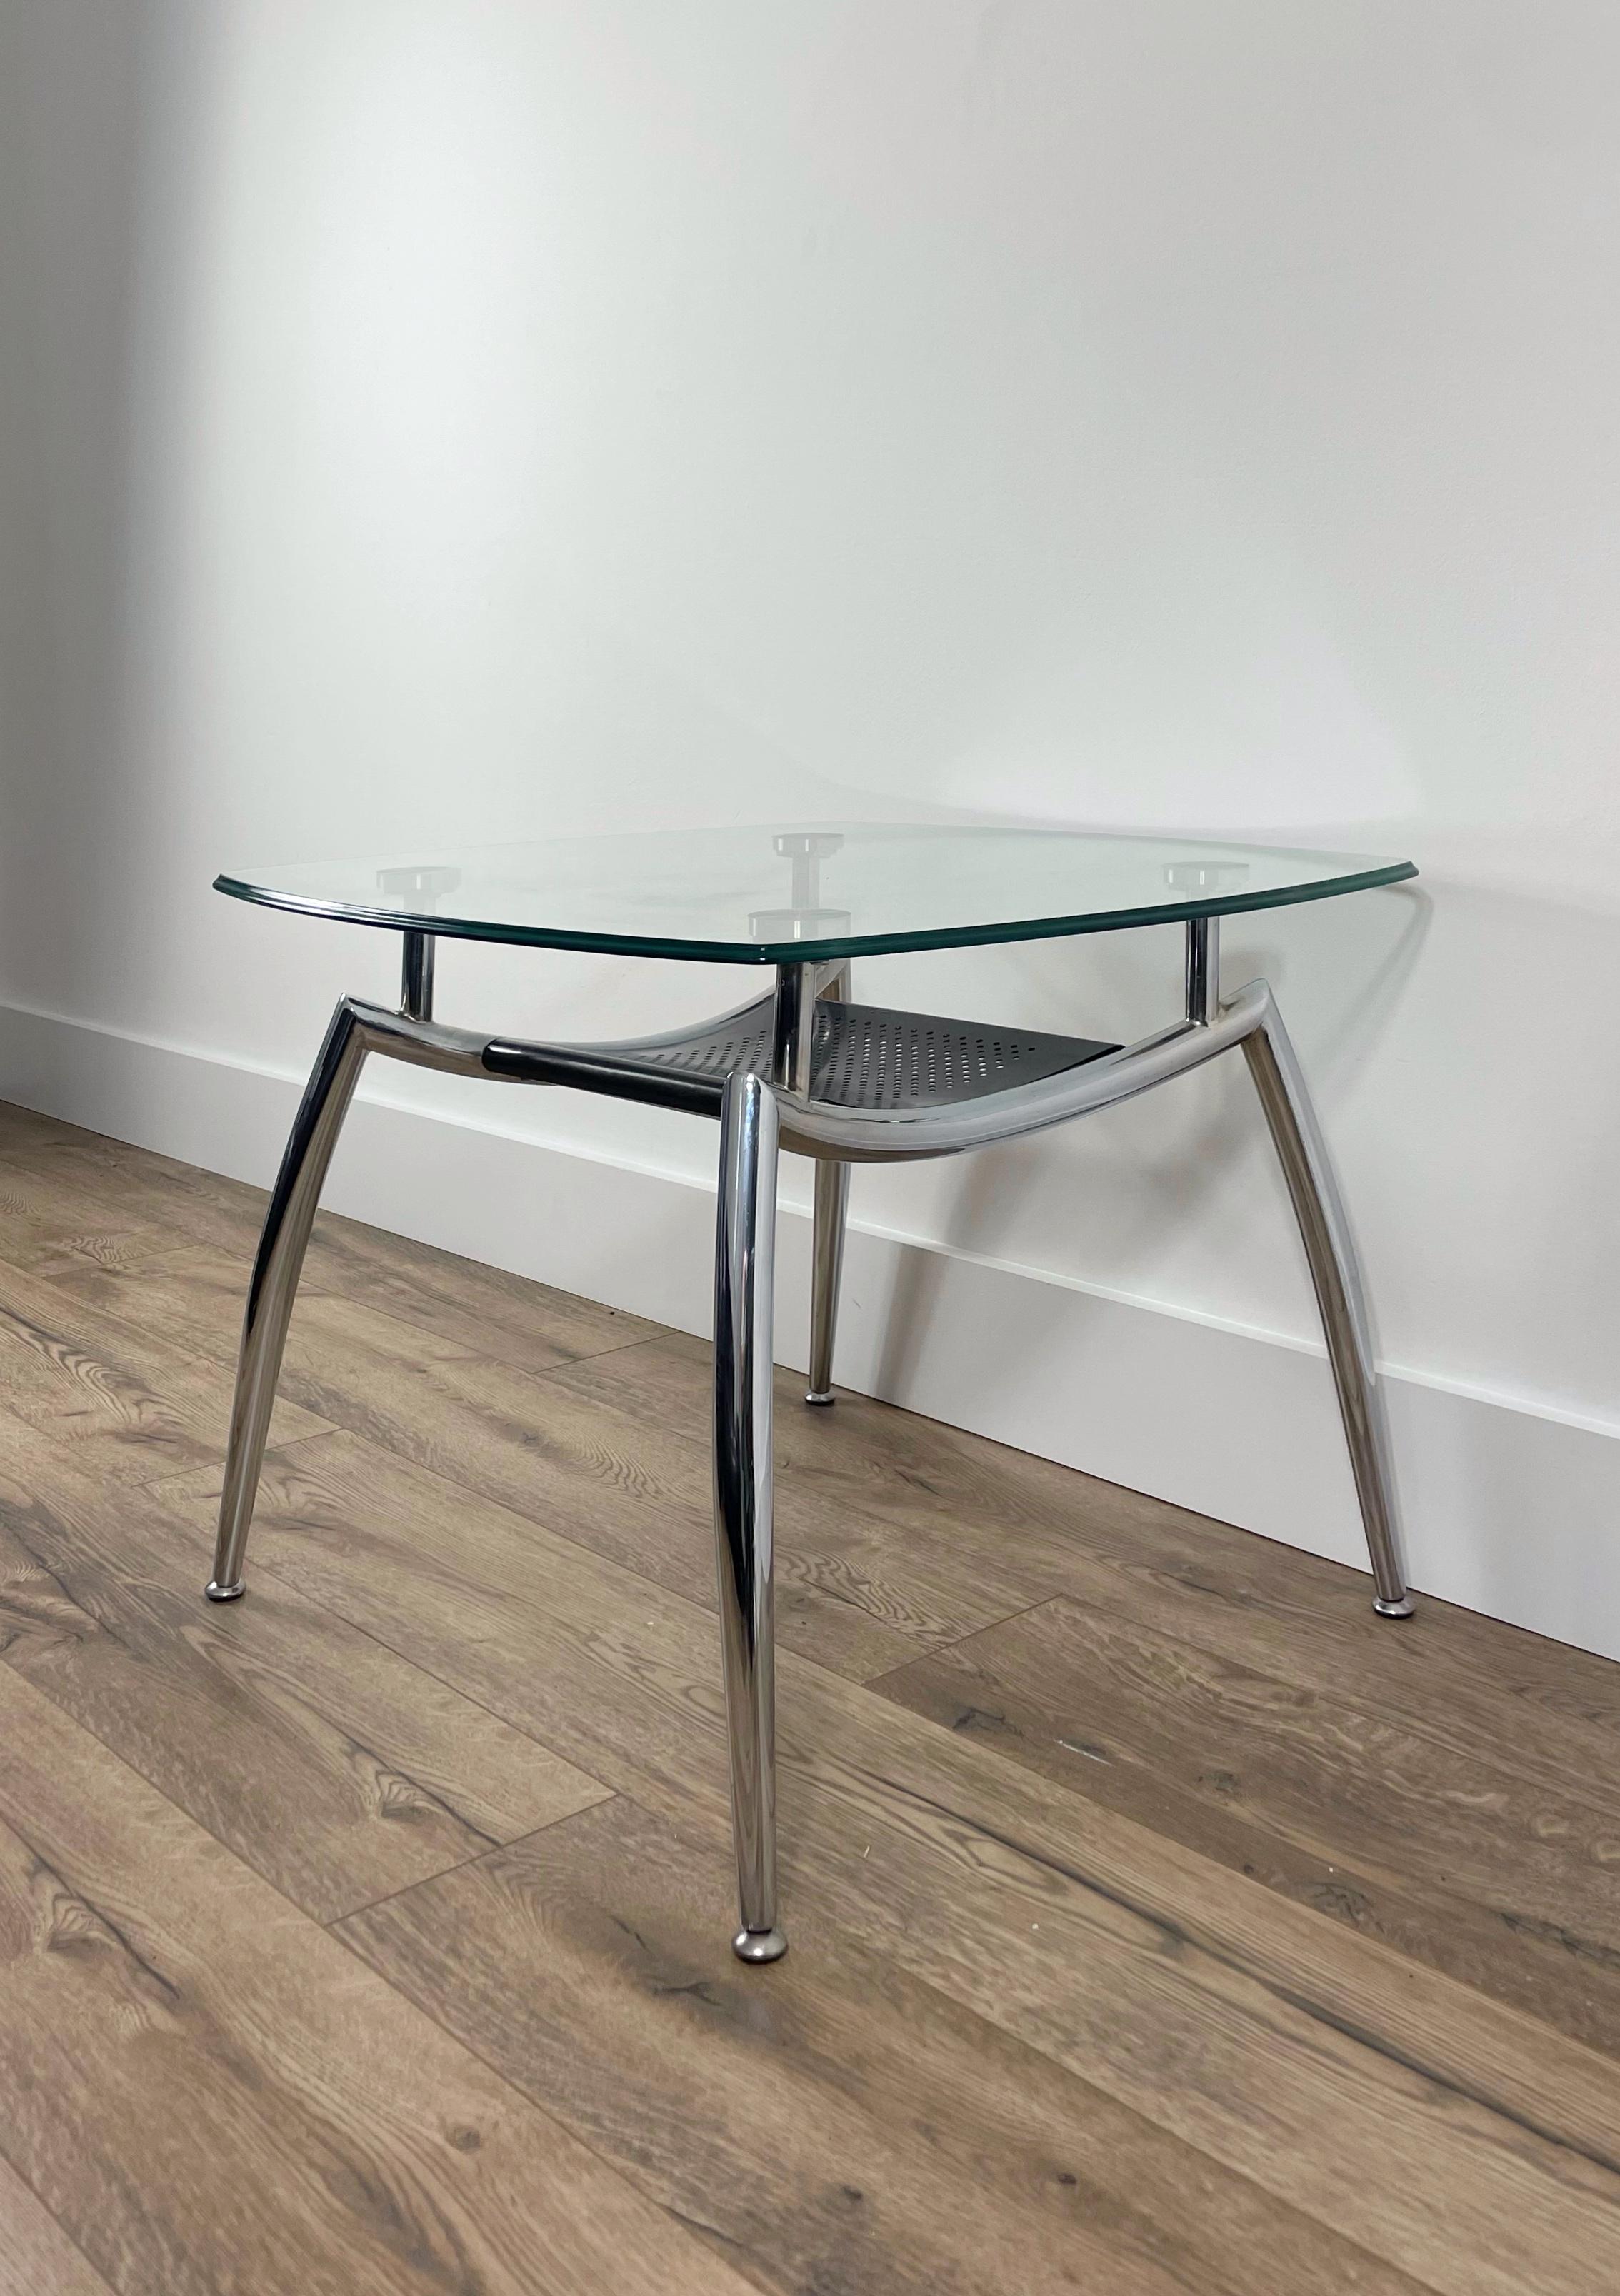 We’re happy to provide our own competitive shipping quotes with trusted couriers. Please message us with your postcode for a more accurate price. Thank you.

This beautiful and unique coffee table was manufactured in the 70s. The shape of this